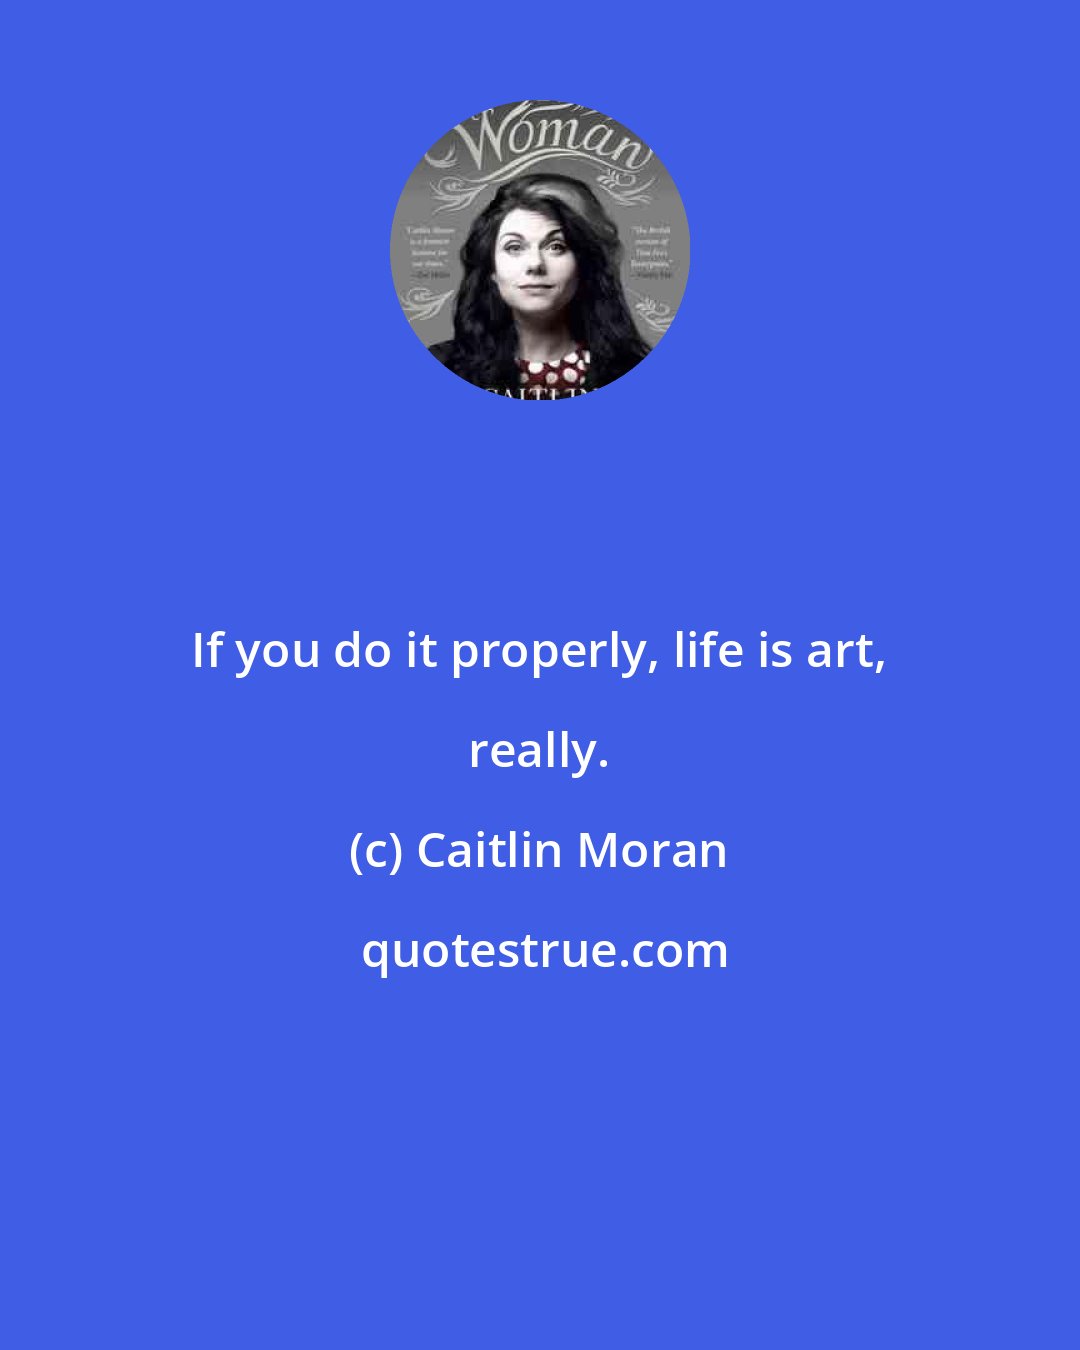 Caitlin Moran: If you do it properly, life is art, really.